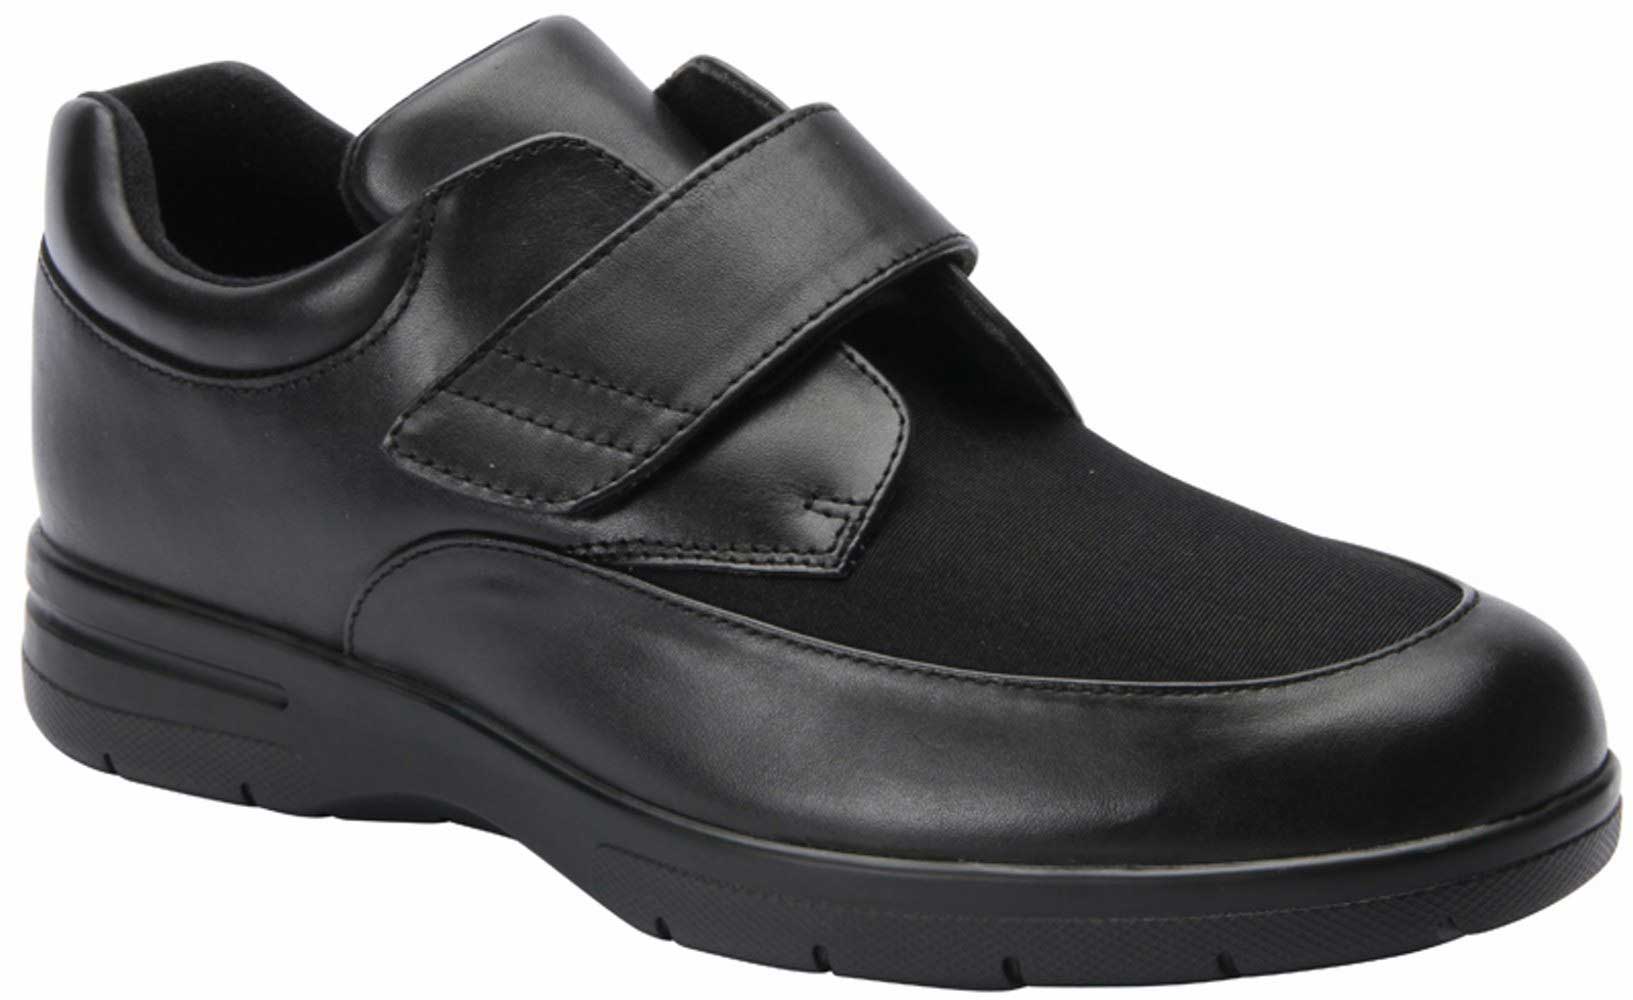 Drew Shoes Quest 14251 - Women's Casual Comfort Therapeutic Diabetic Shoe - Extra Depth For Orthotics